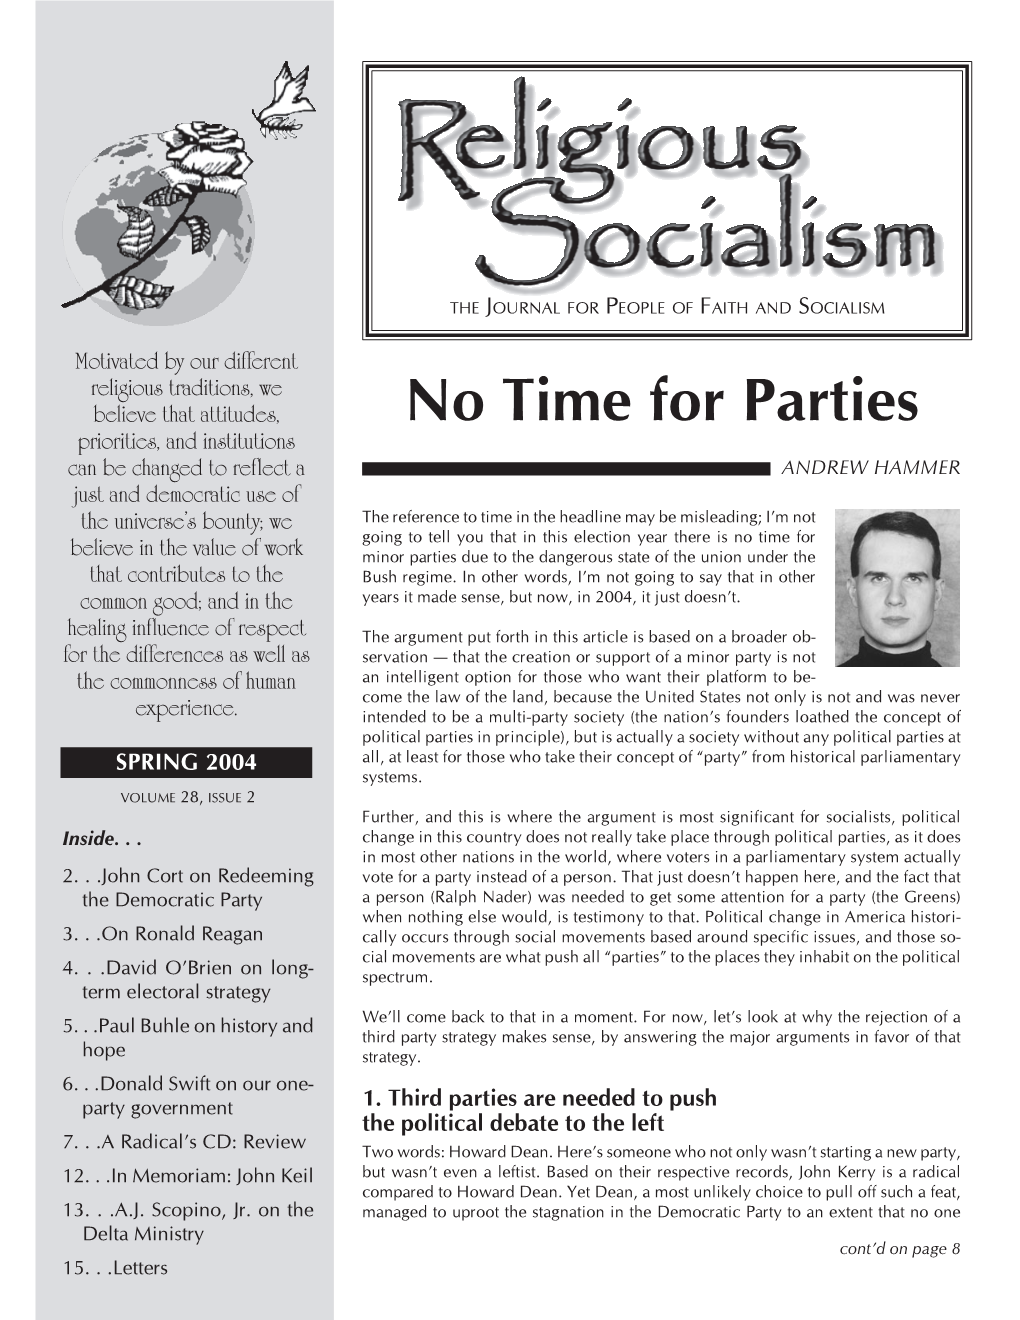 SPRING 2004 All, at Least for Those Who Take Their Concept of “Party” from Historical Parliamentary Systems